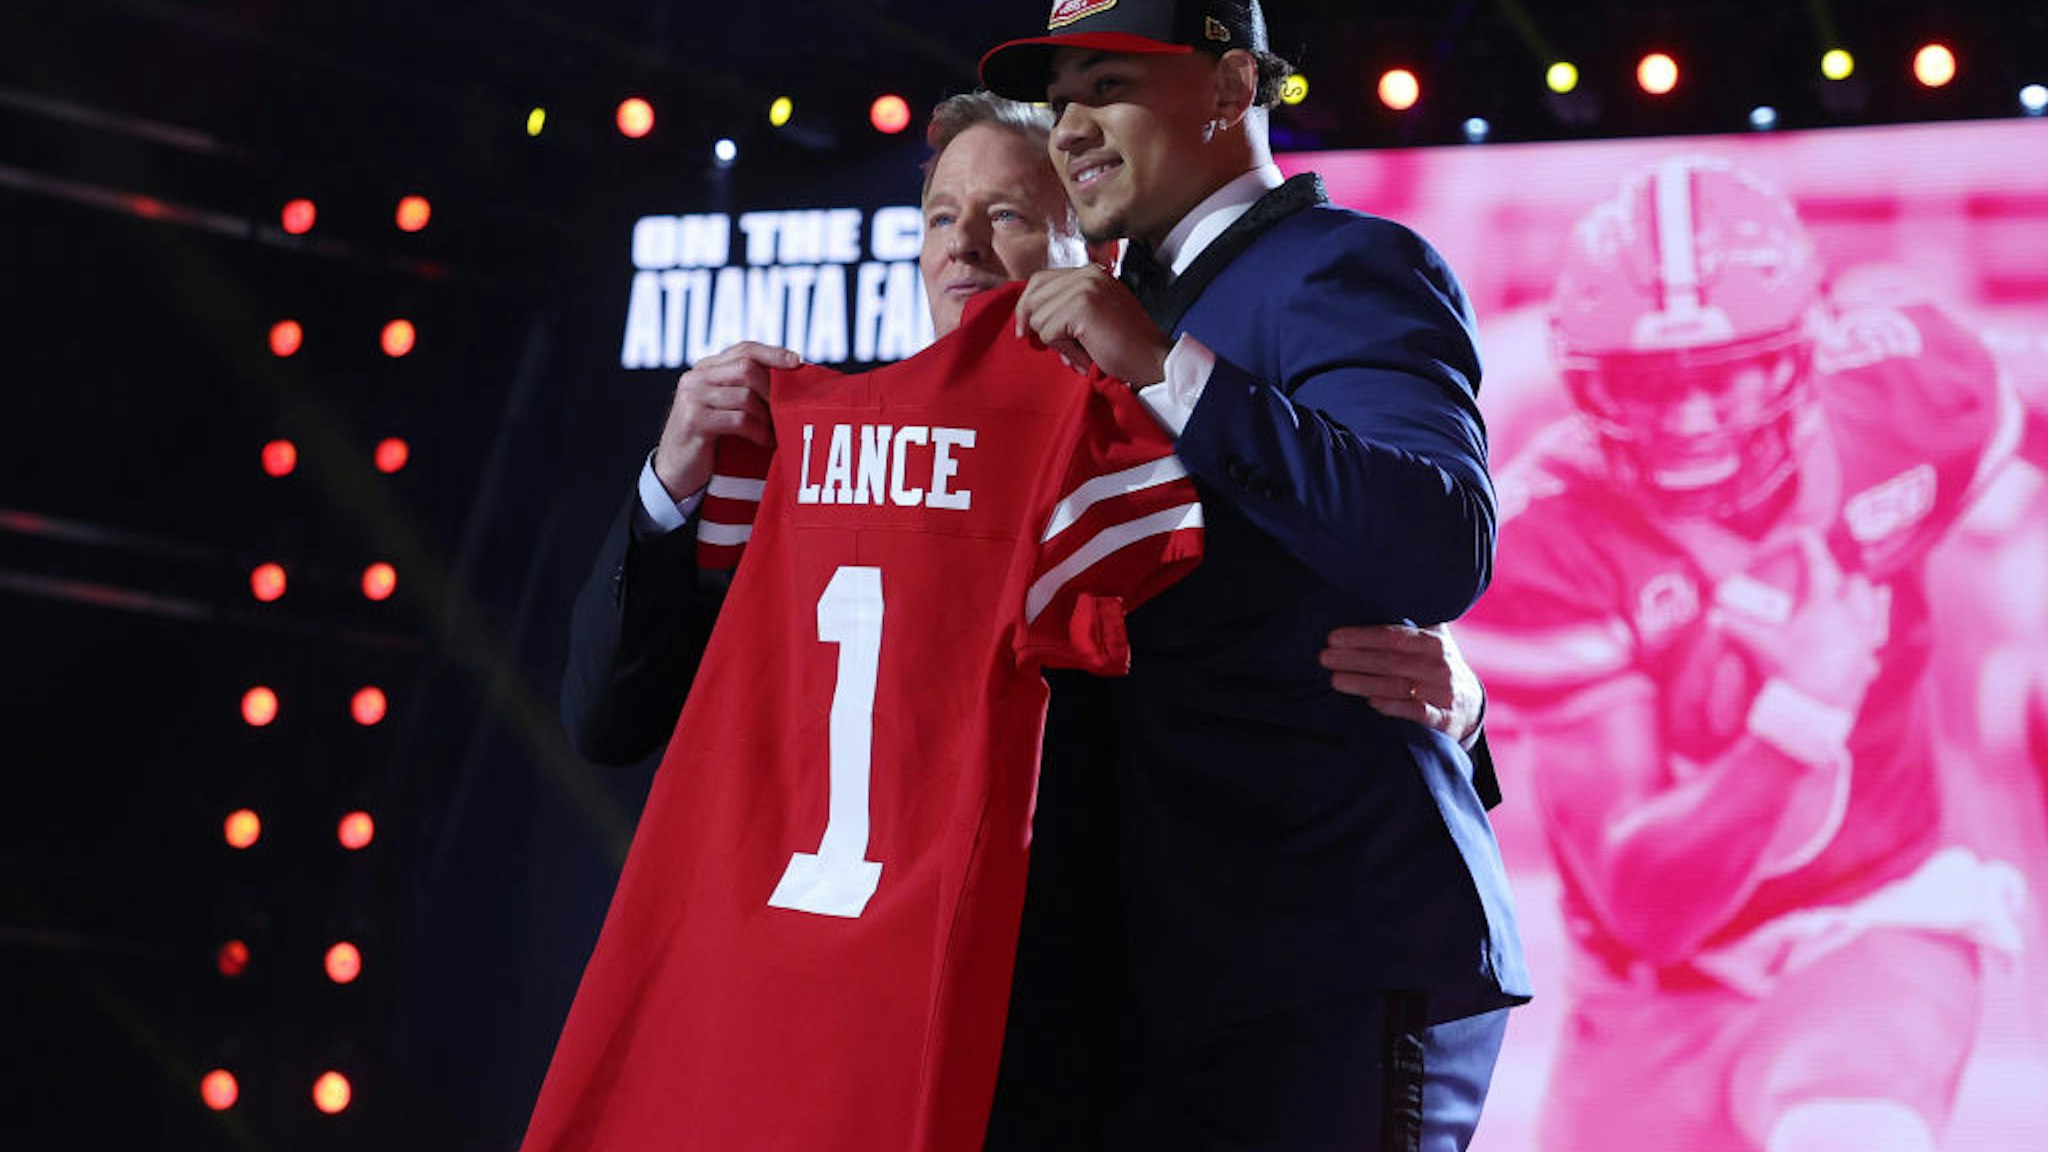 CLEVELAND, OHIO - APRIL 29: Trey Lance poses with NFL Commissioner Roger Goodell onstage after being selected third by the San Francisco 49ers during round one of the 2021 NFL Draft at the Great Lakes Science Center on April 29, 2021 in Cleveland, Ohio. (Photo by Gregory Shamus/Getty Images)